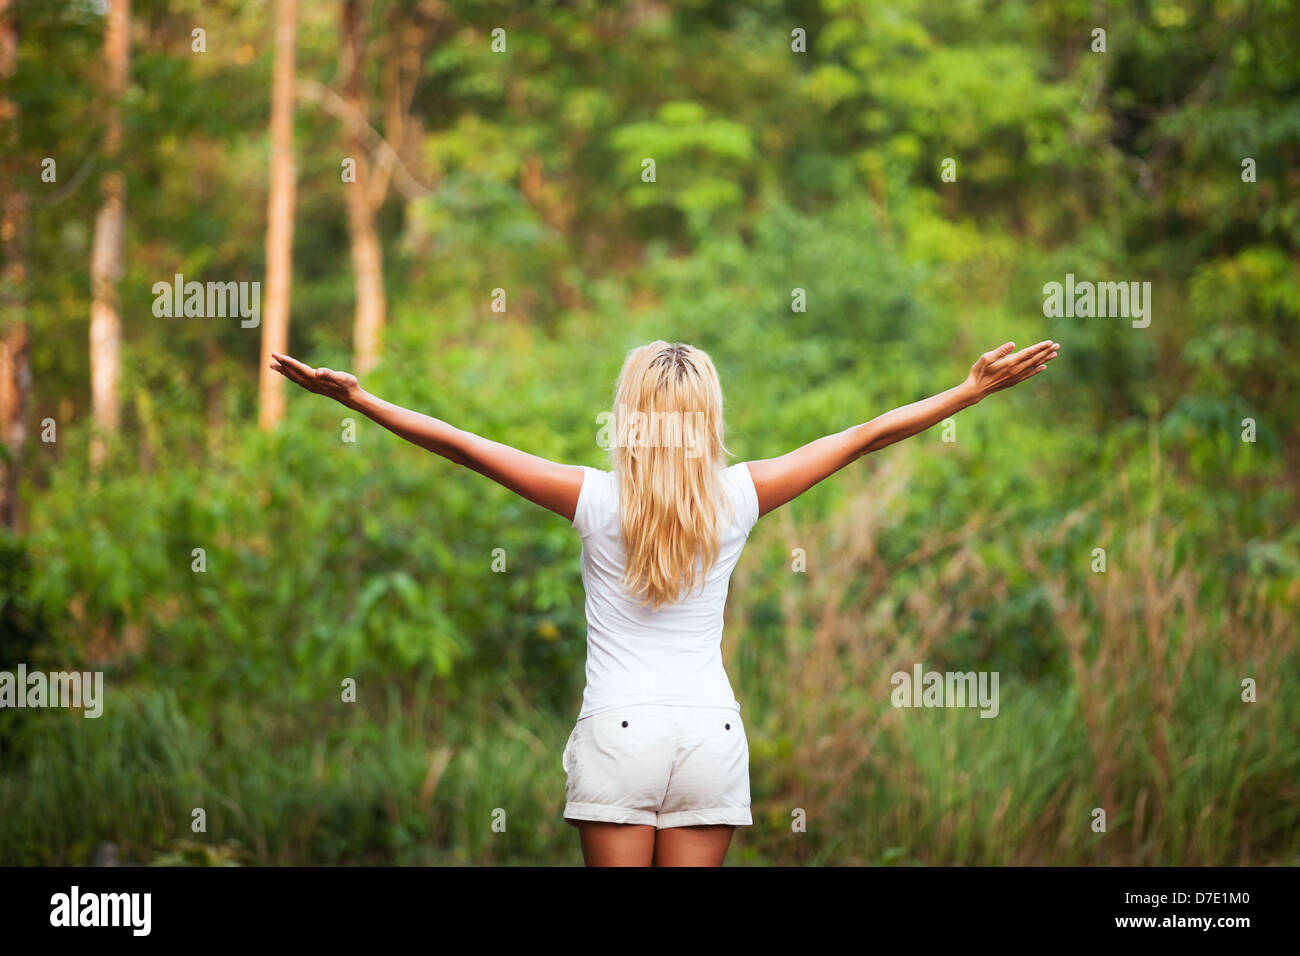 harmony with nature, back woman with raised hands in the forest Stock Photo